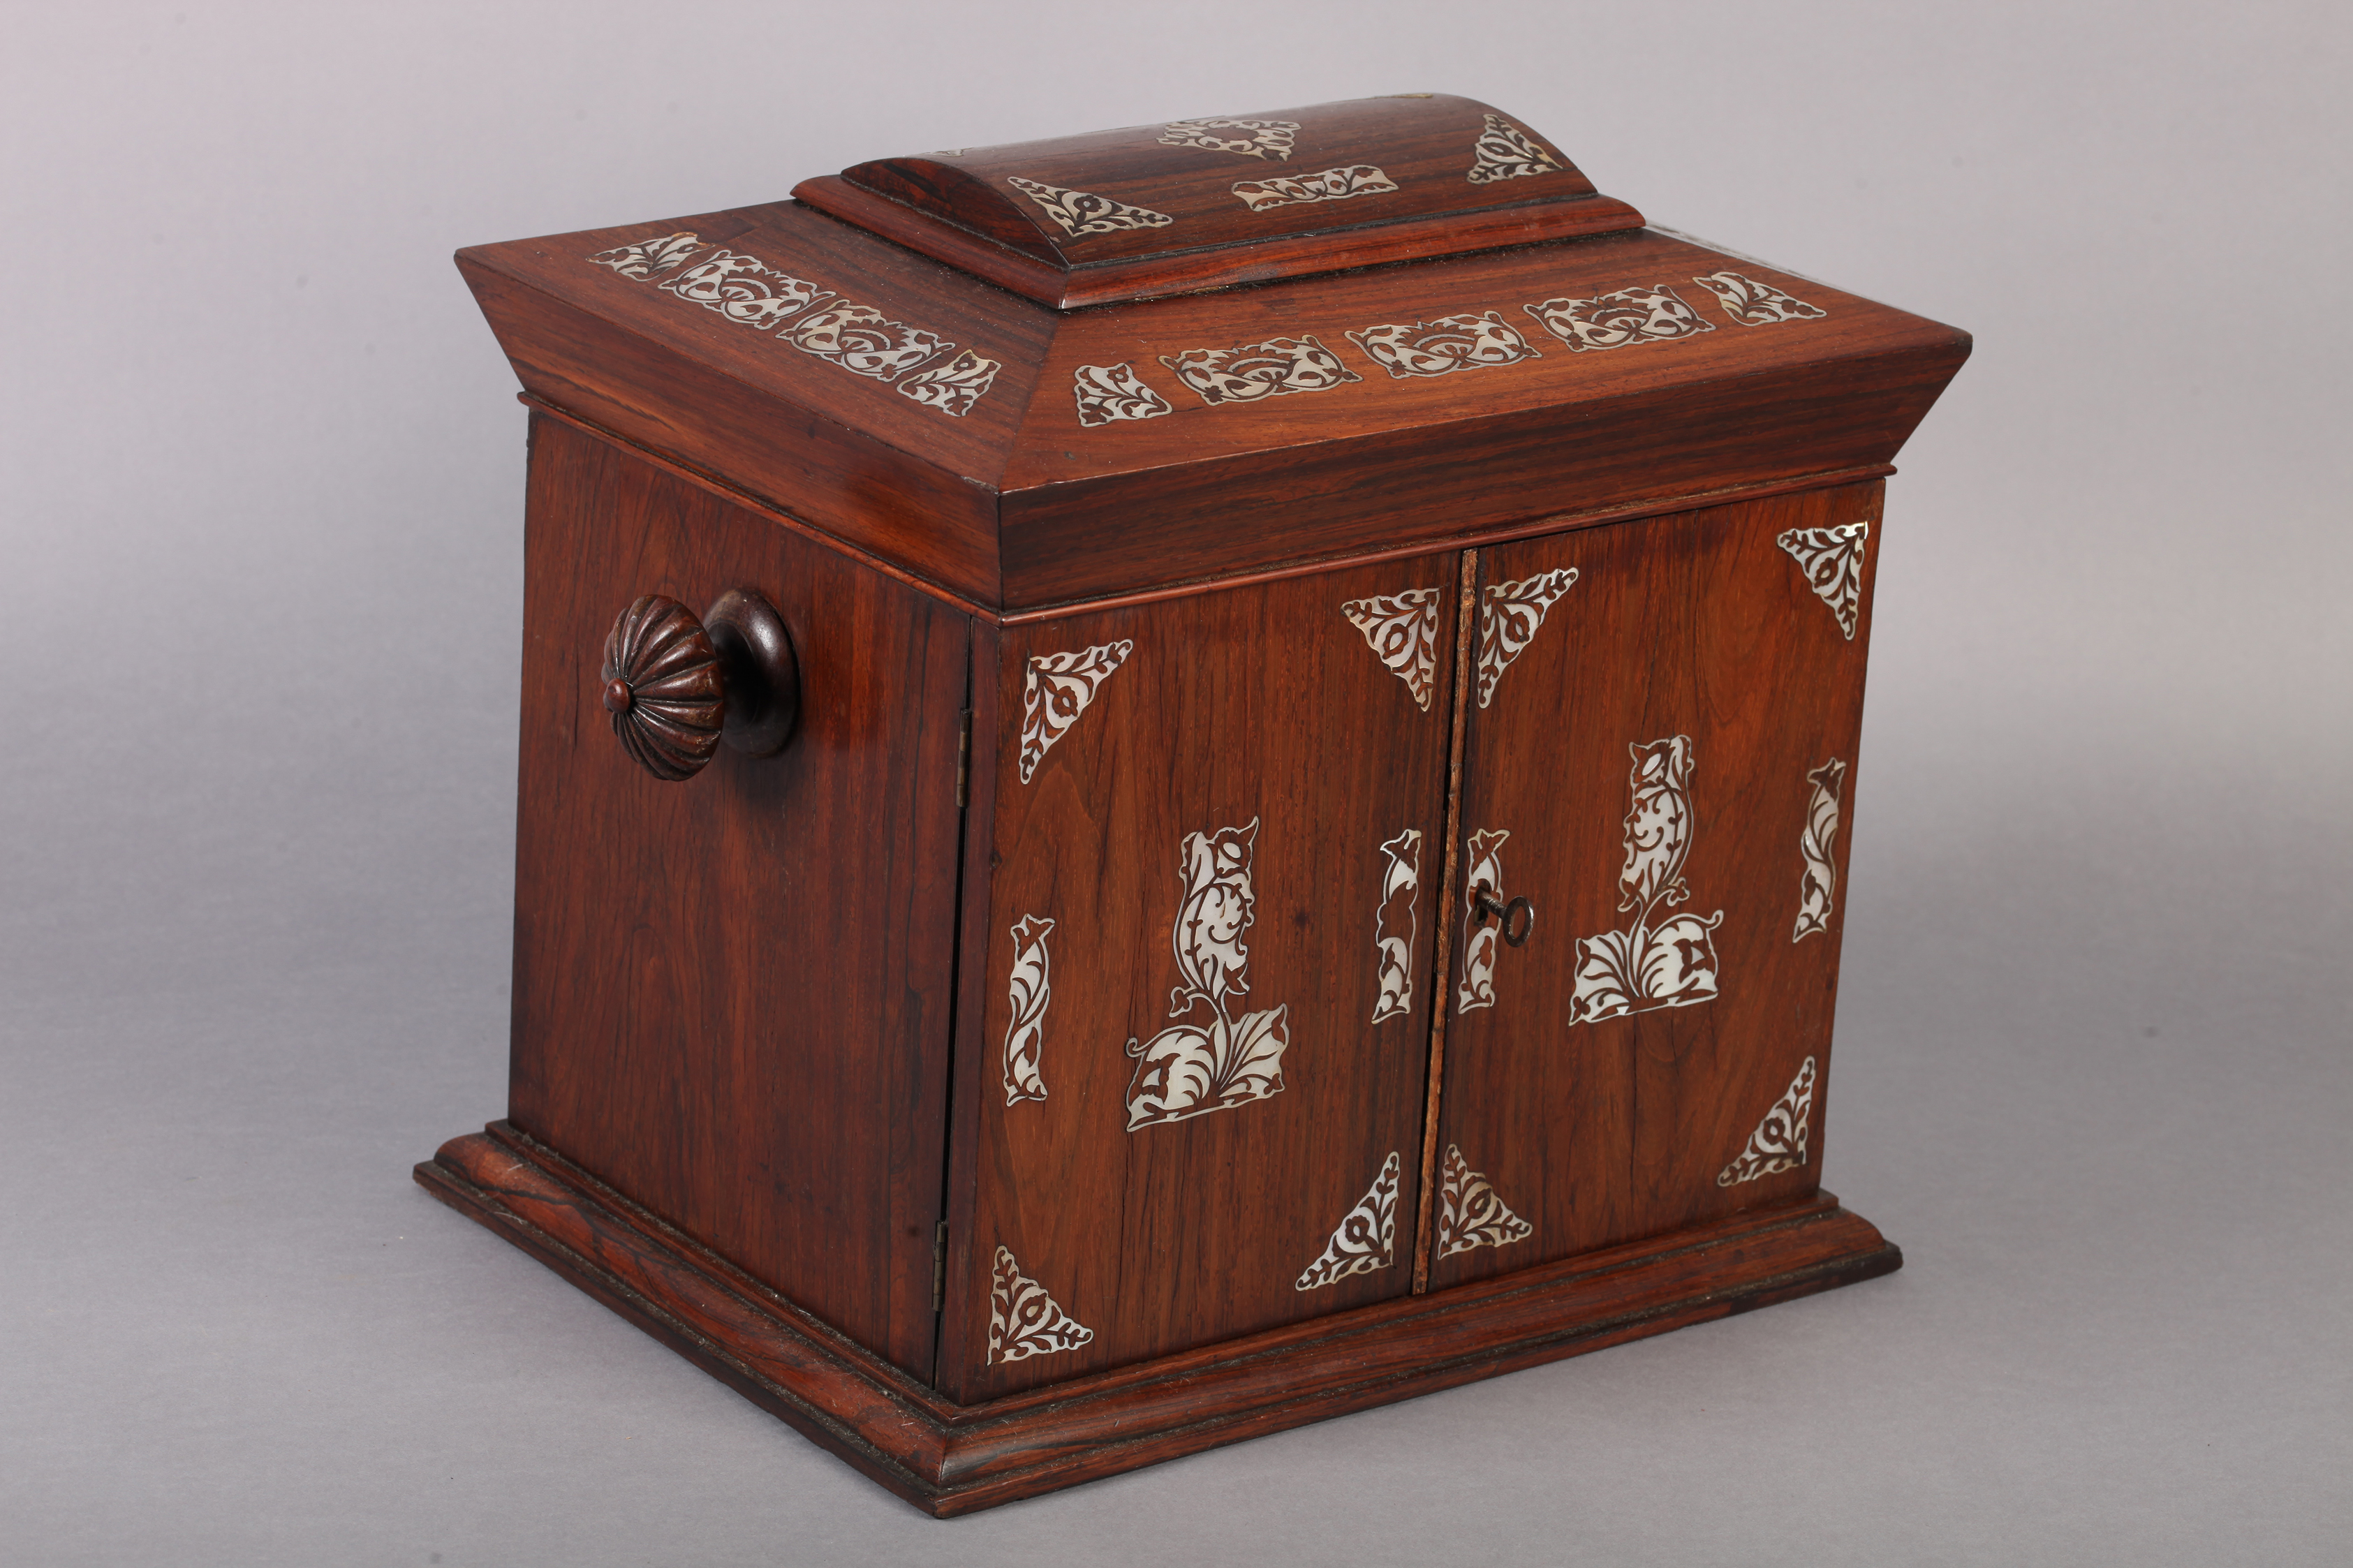 A VICTORIAN MOTHER OF PEARL INLAID ROSEWOOD TABLE CABINET with domed sarcophagus shaped hinged lid - Image 2 of 5